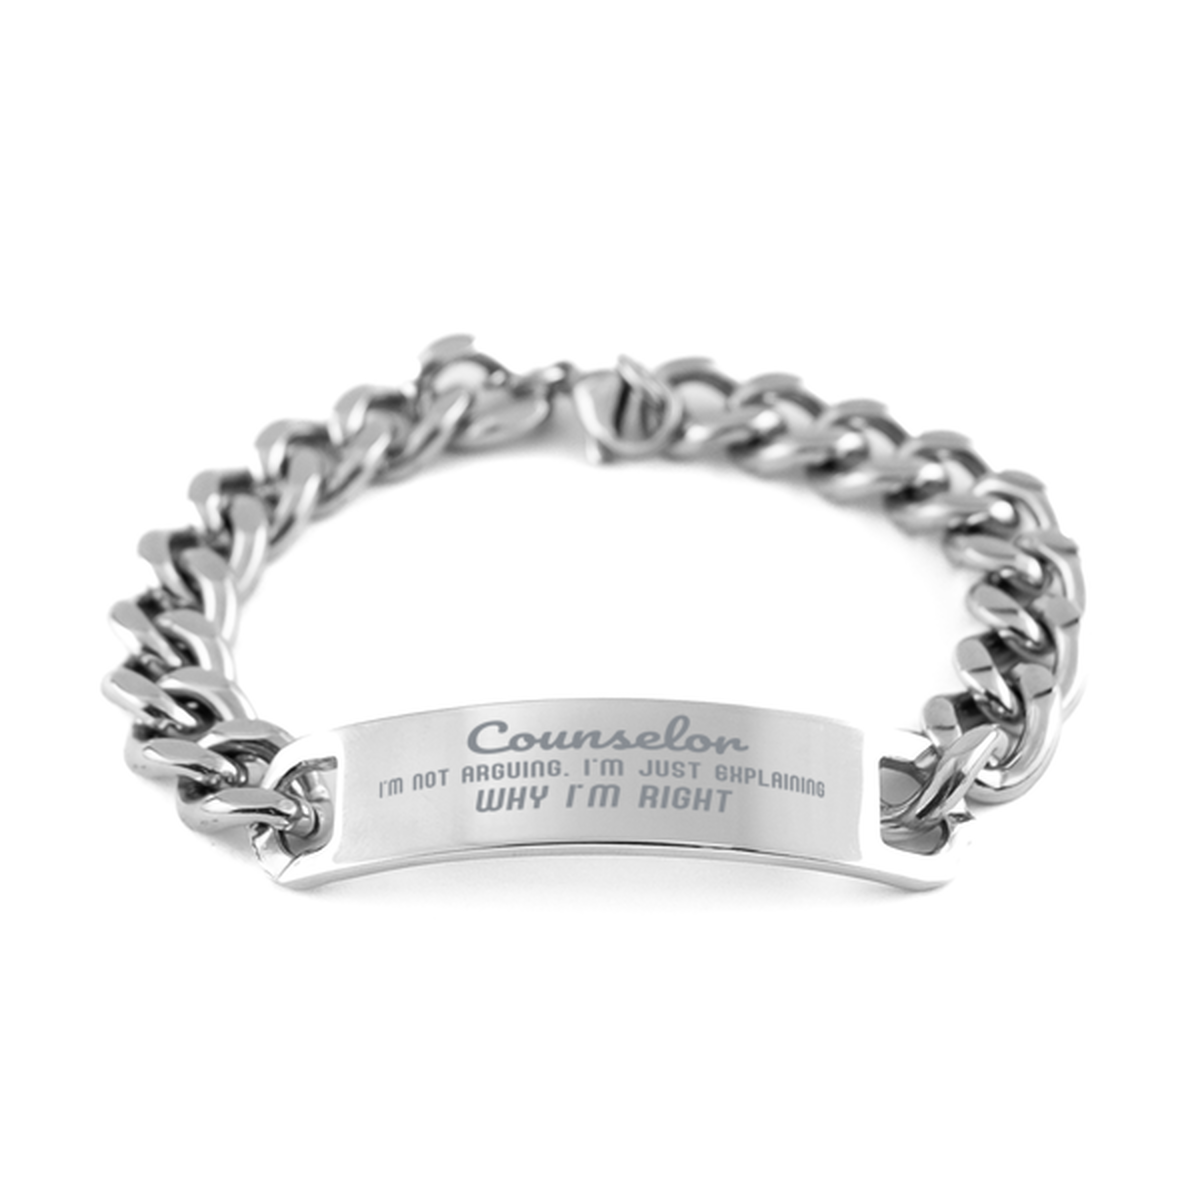 Counselor I'm not Arguing. I'm Just Explaining Why I'm RIGHT Cuban Chain Stainless Steel Bracelet, Graduation Birthday Christmas Counselor Gifts For Counselor Funny Saying Quote Present for Men Women Coworker